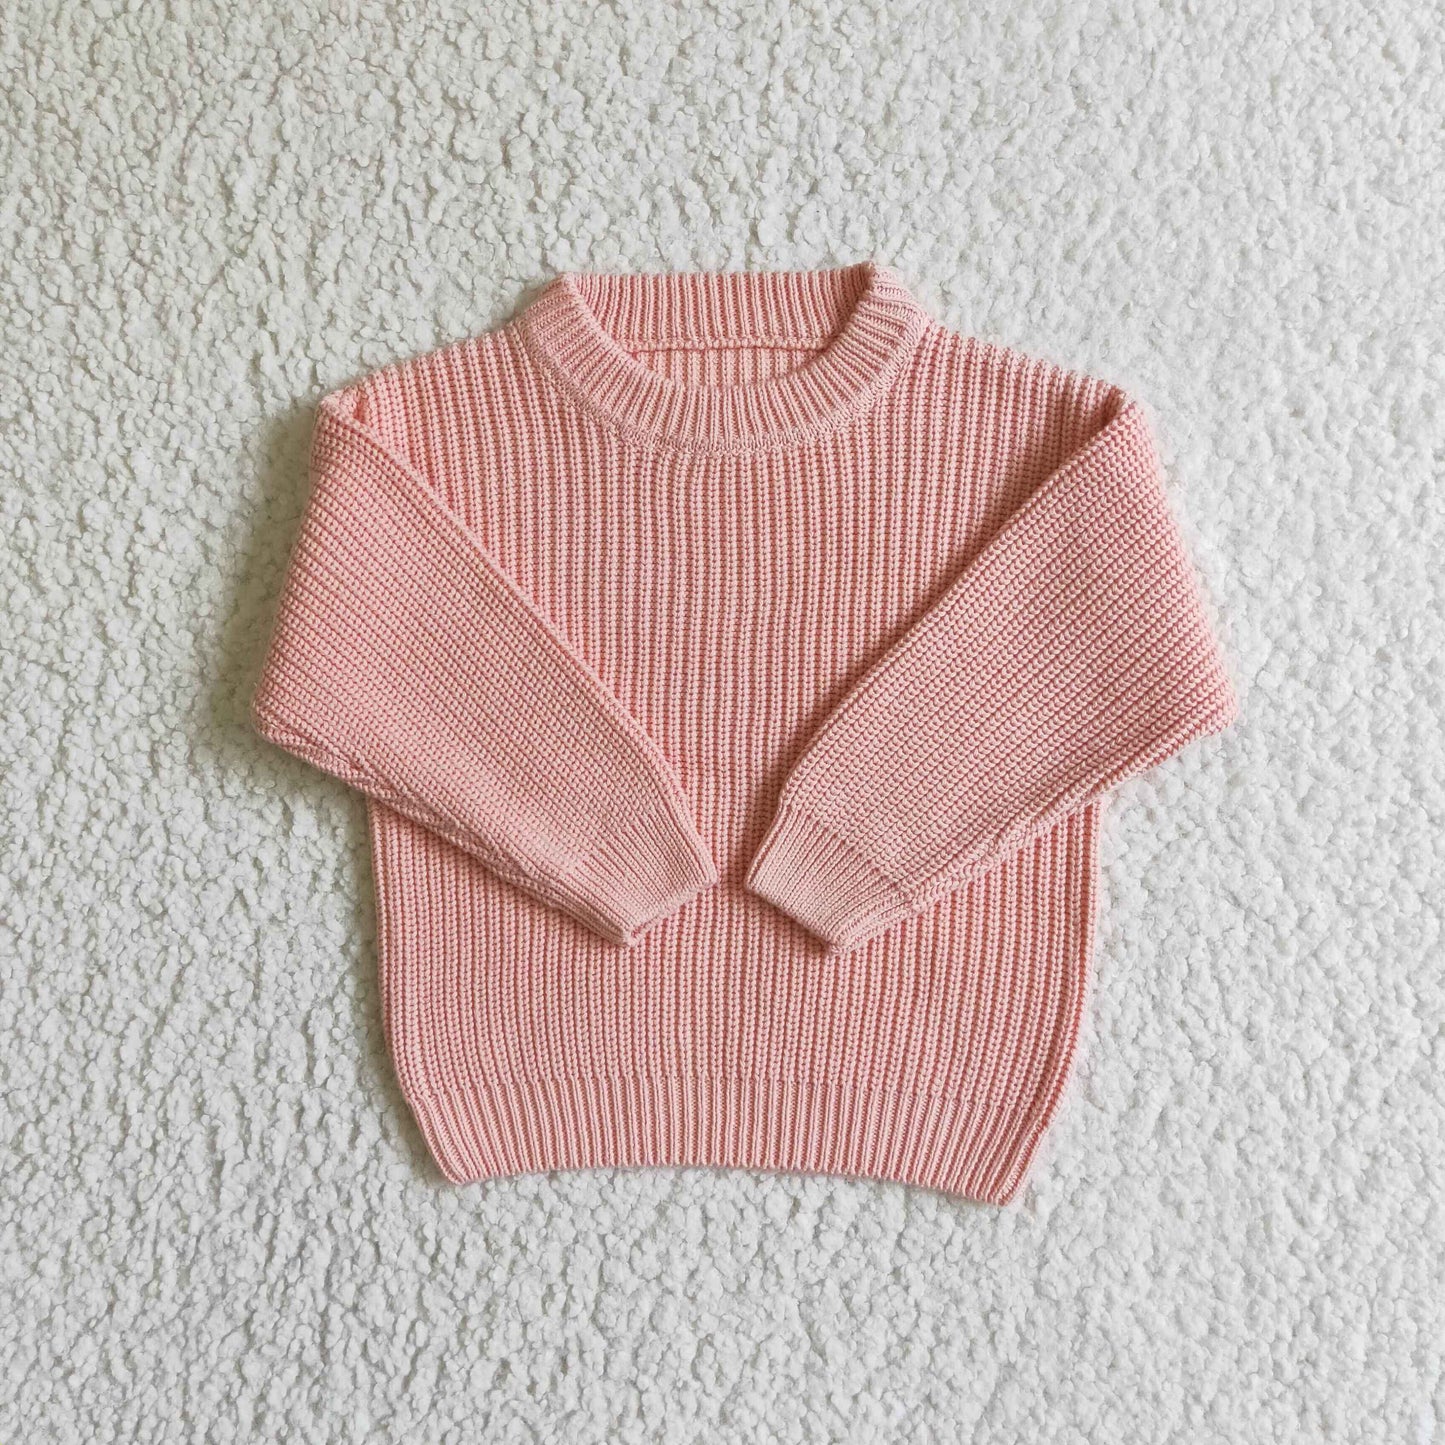 GT0036 Children's pink knitted sweater